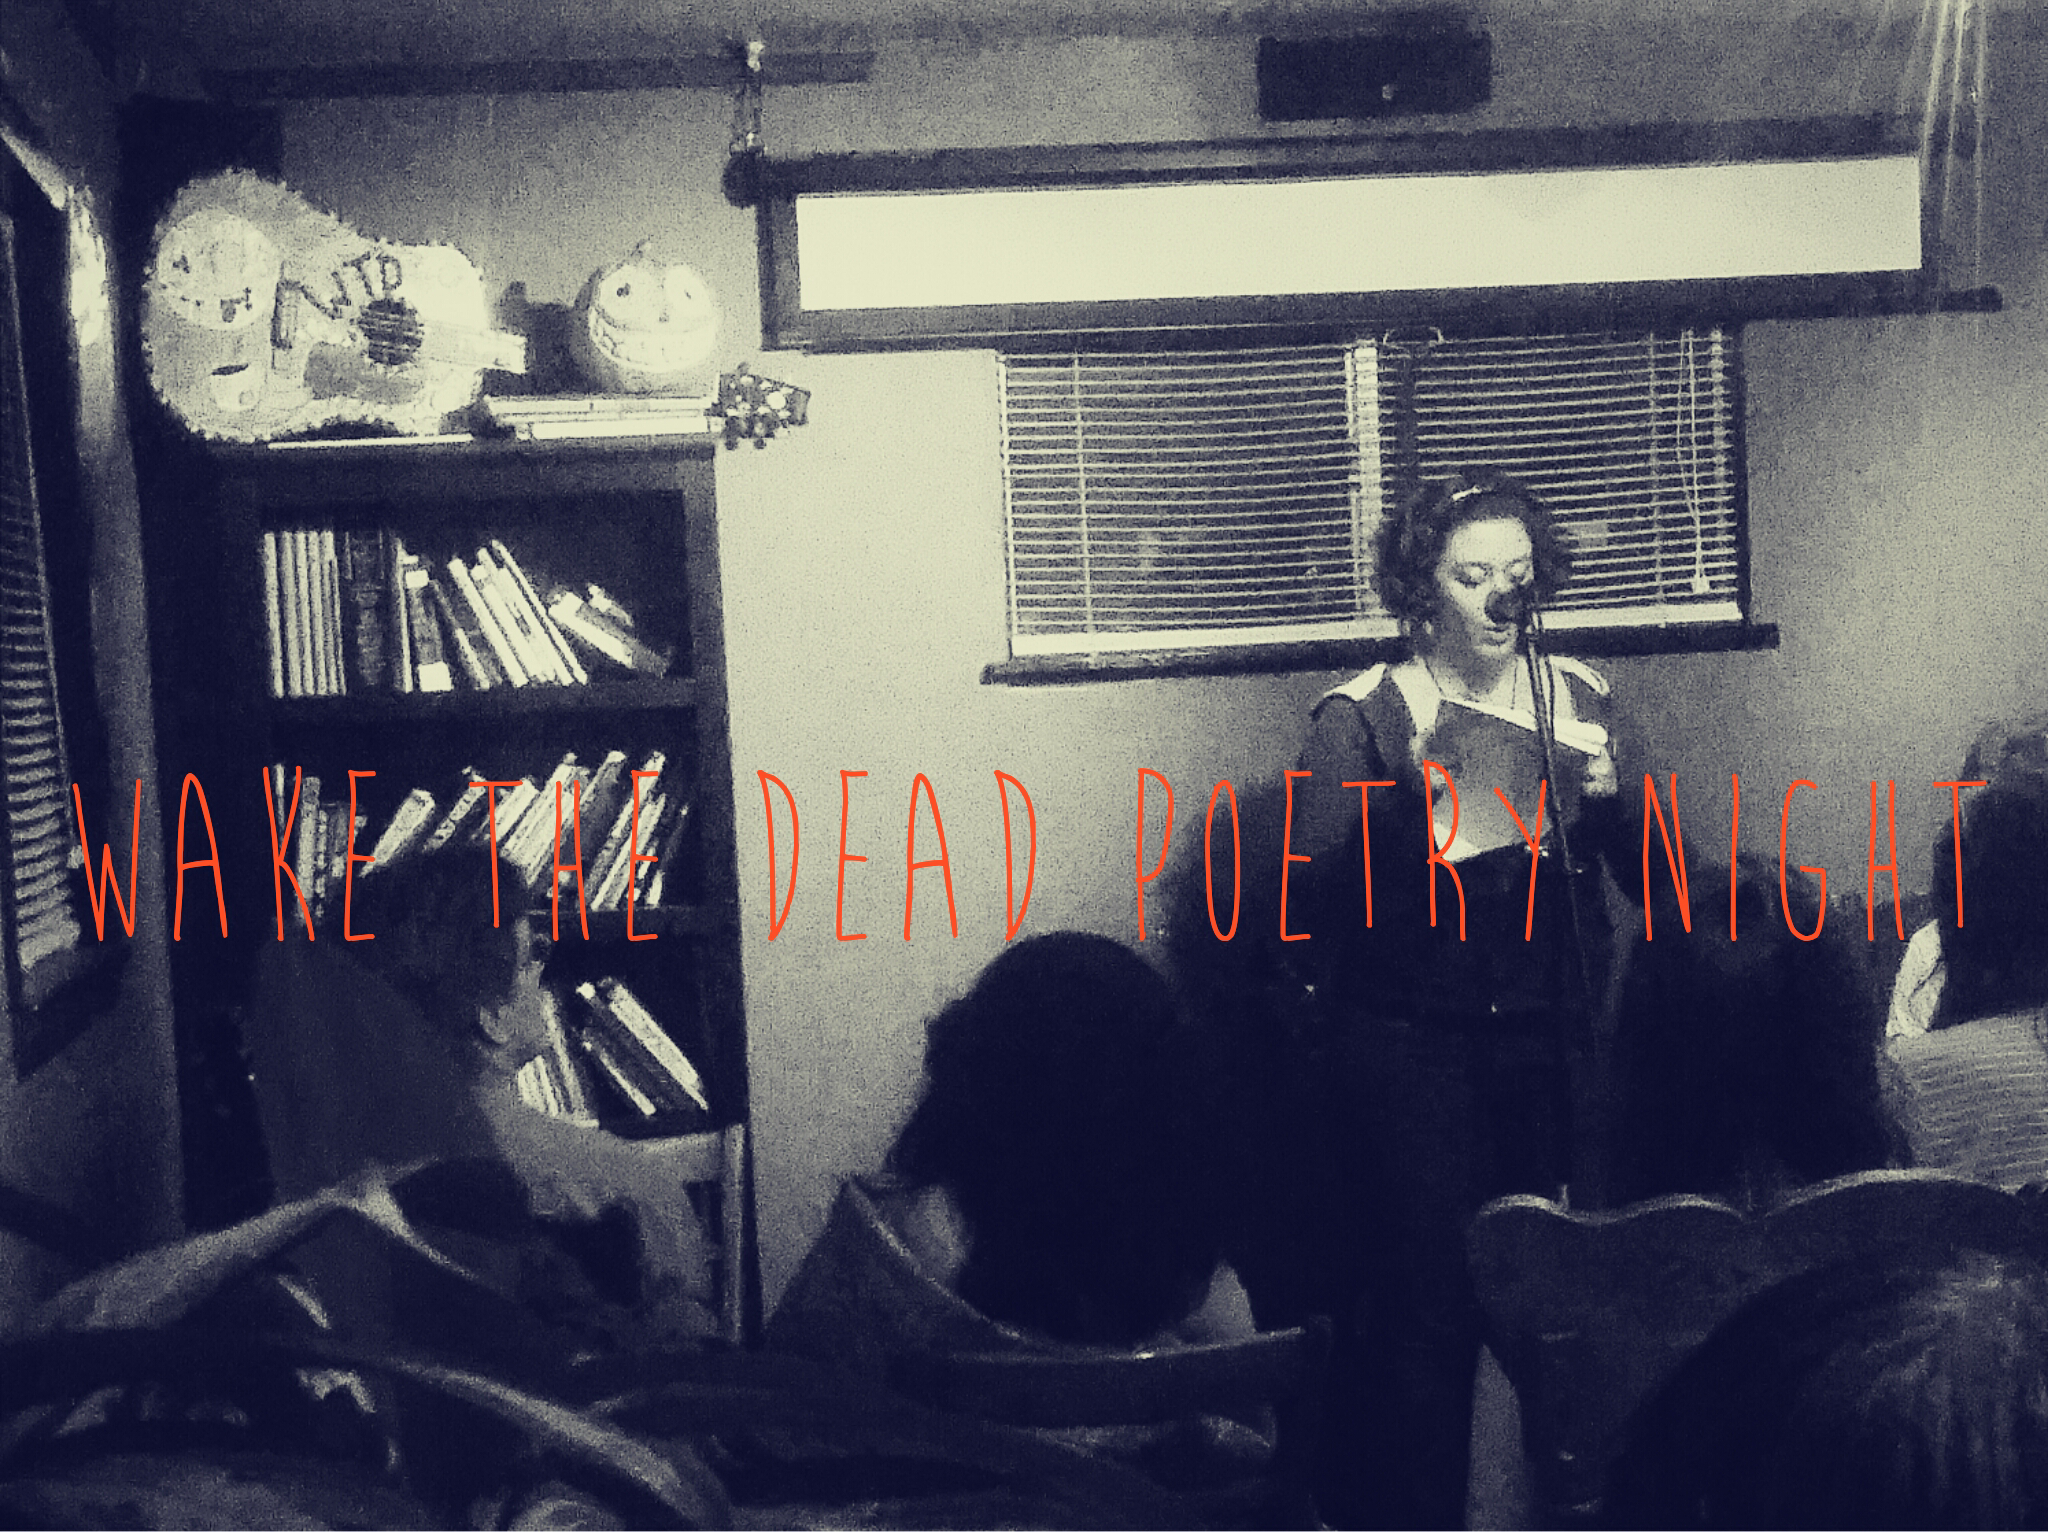 wake the dead poetry night